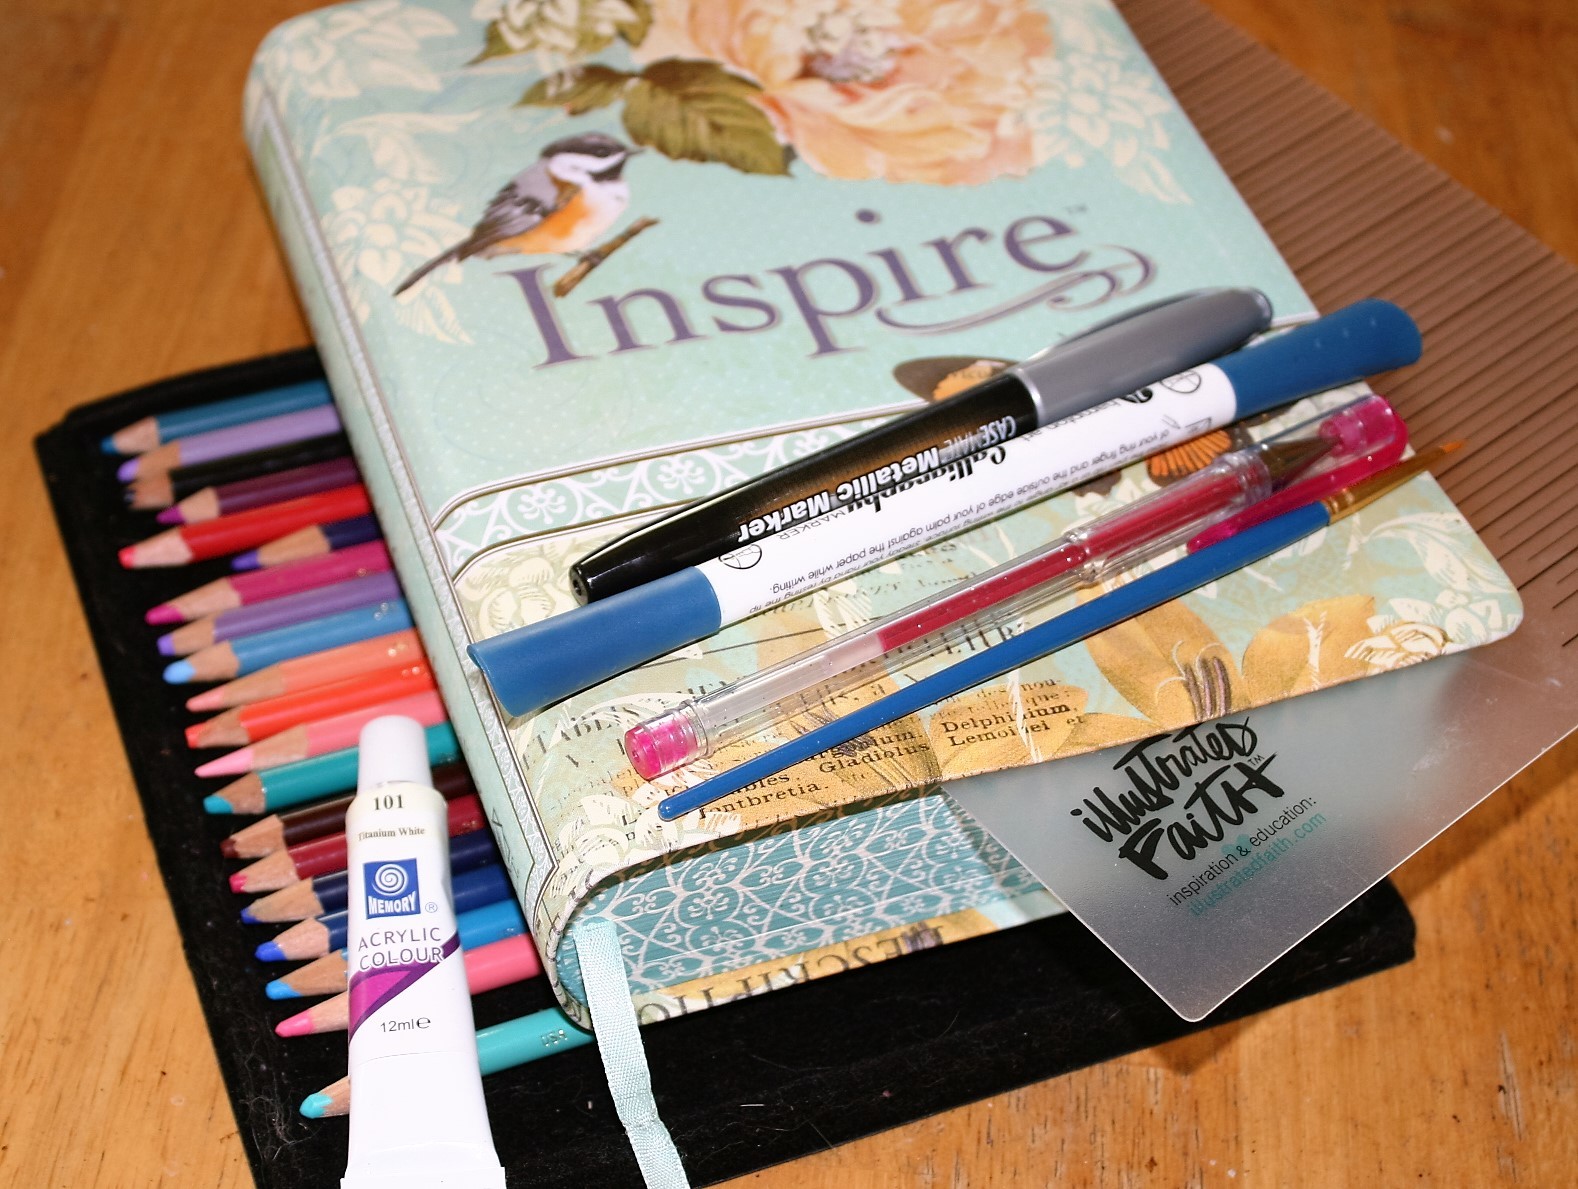 Gel Pens & Colored Pencils for Bible Journaling or Coloring